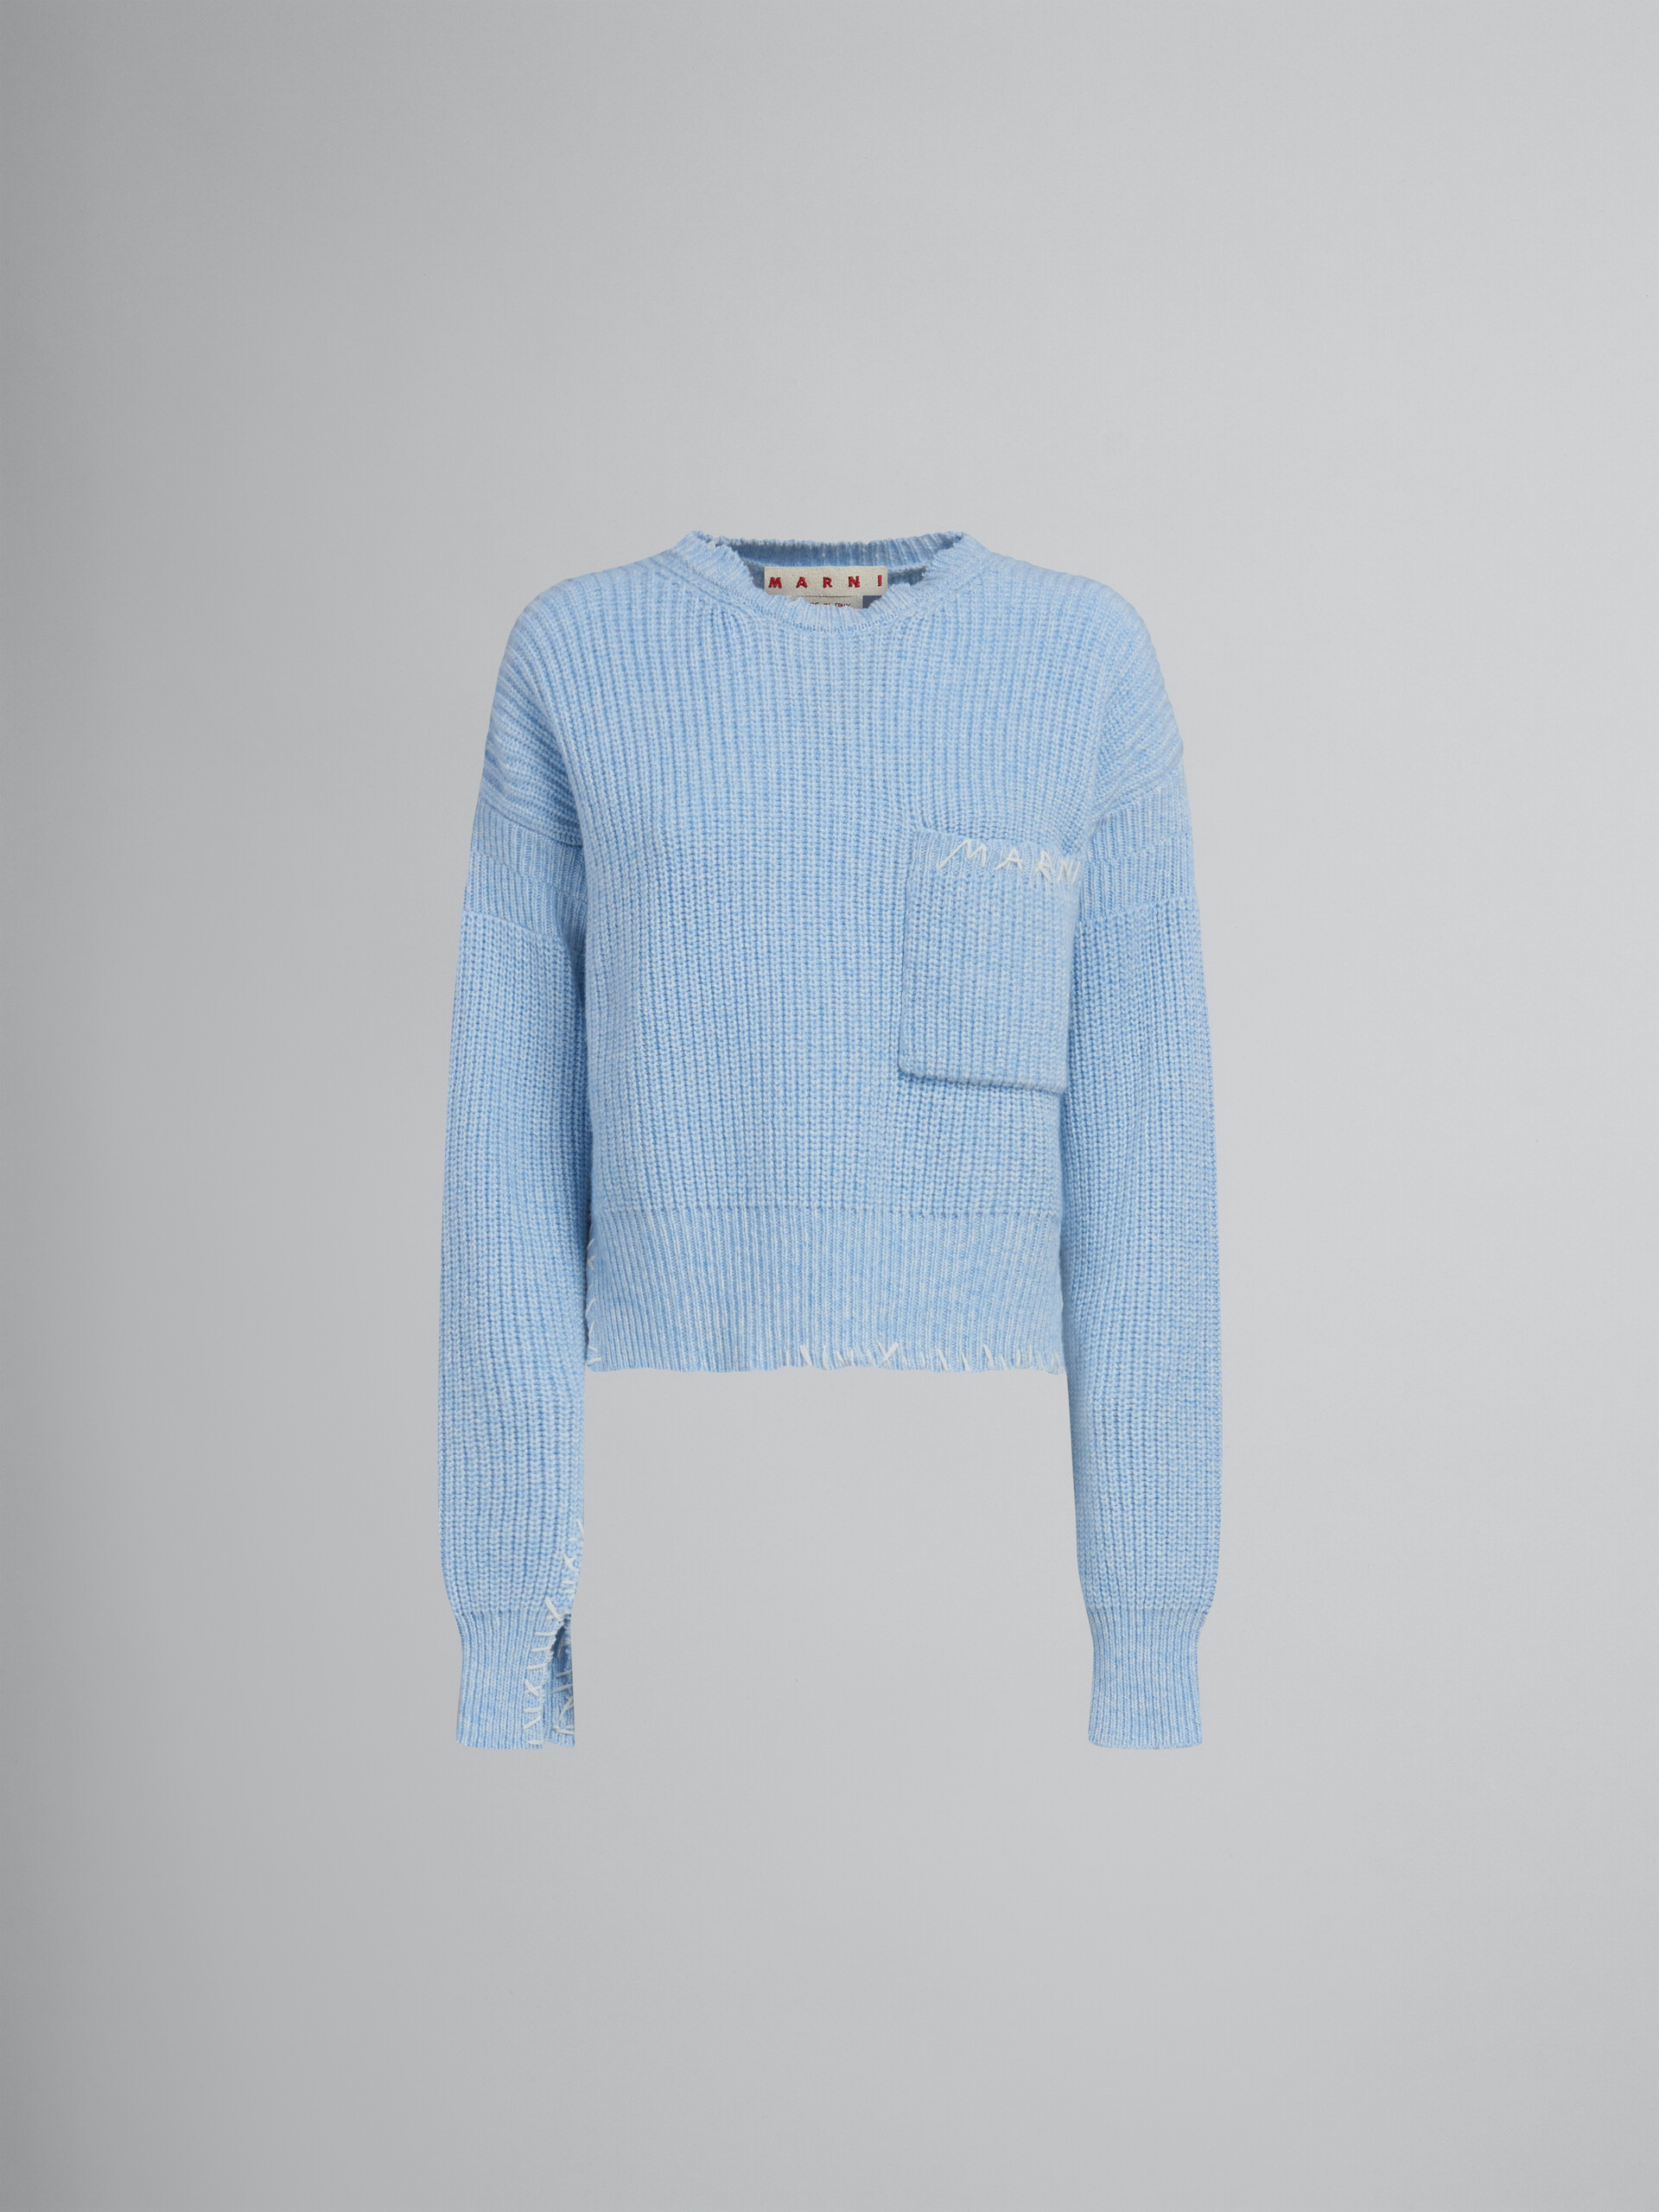 Blue mouliné jumper with mending - Pullovers - Image 1